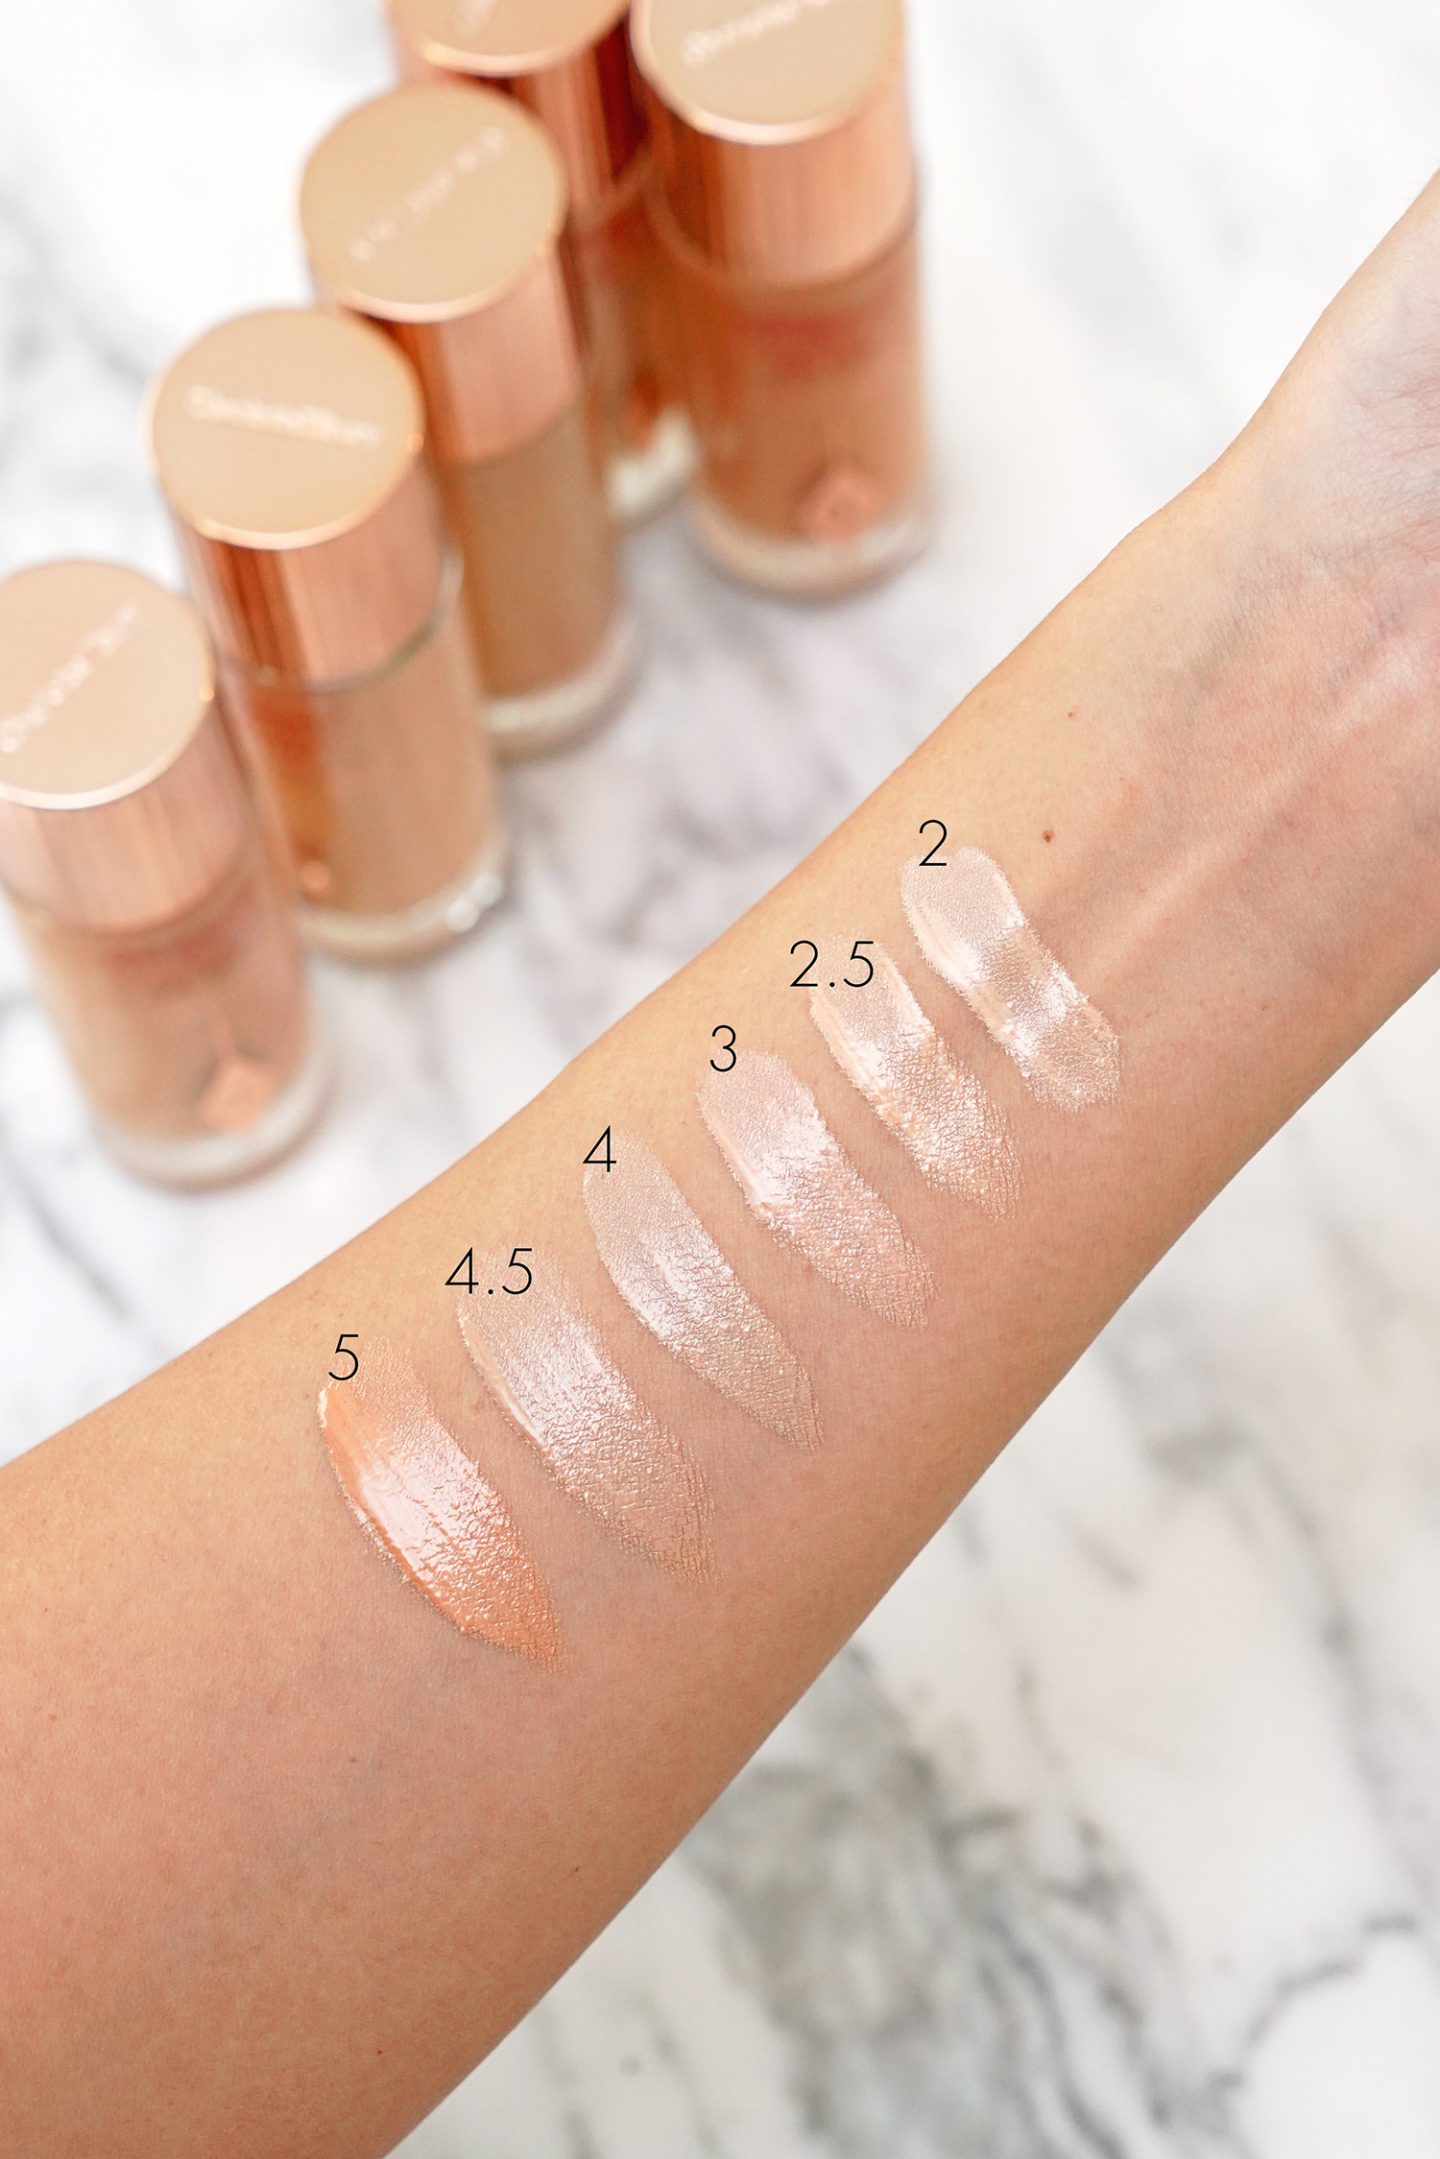 Charlotte Tilbury Hollywood Flawless Filter swatches